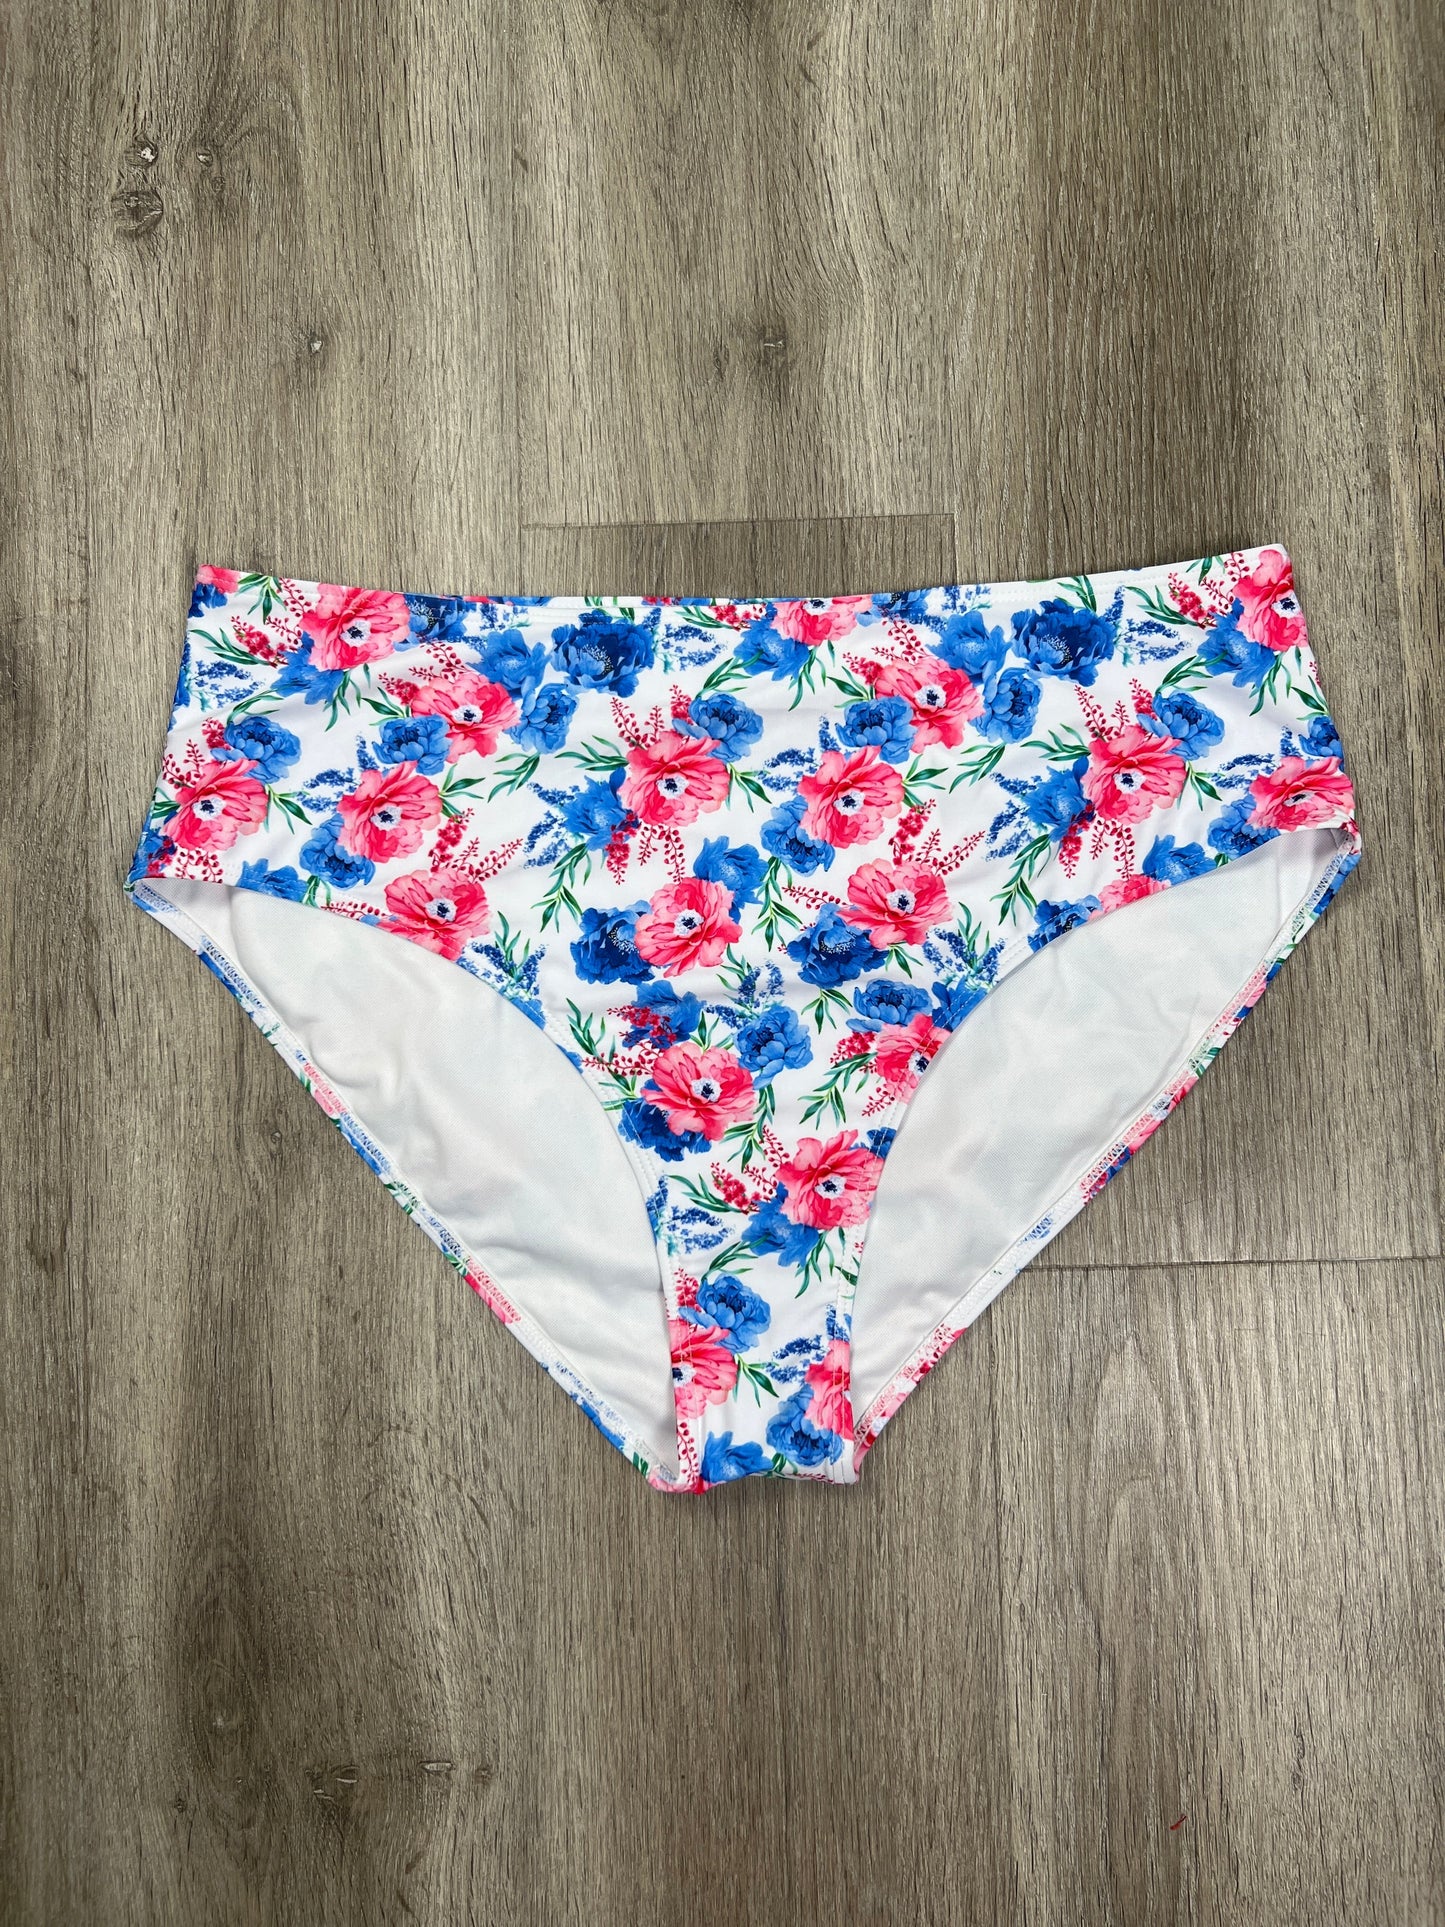 Floral Print Swimsuit Bottom Shein, Size 3x